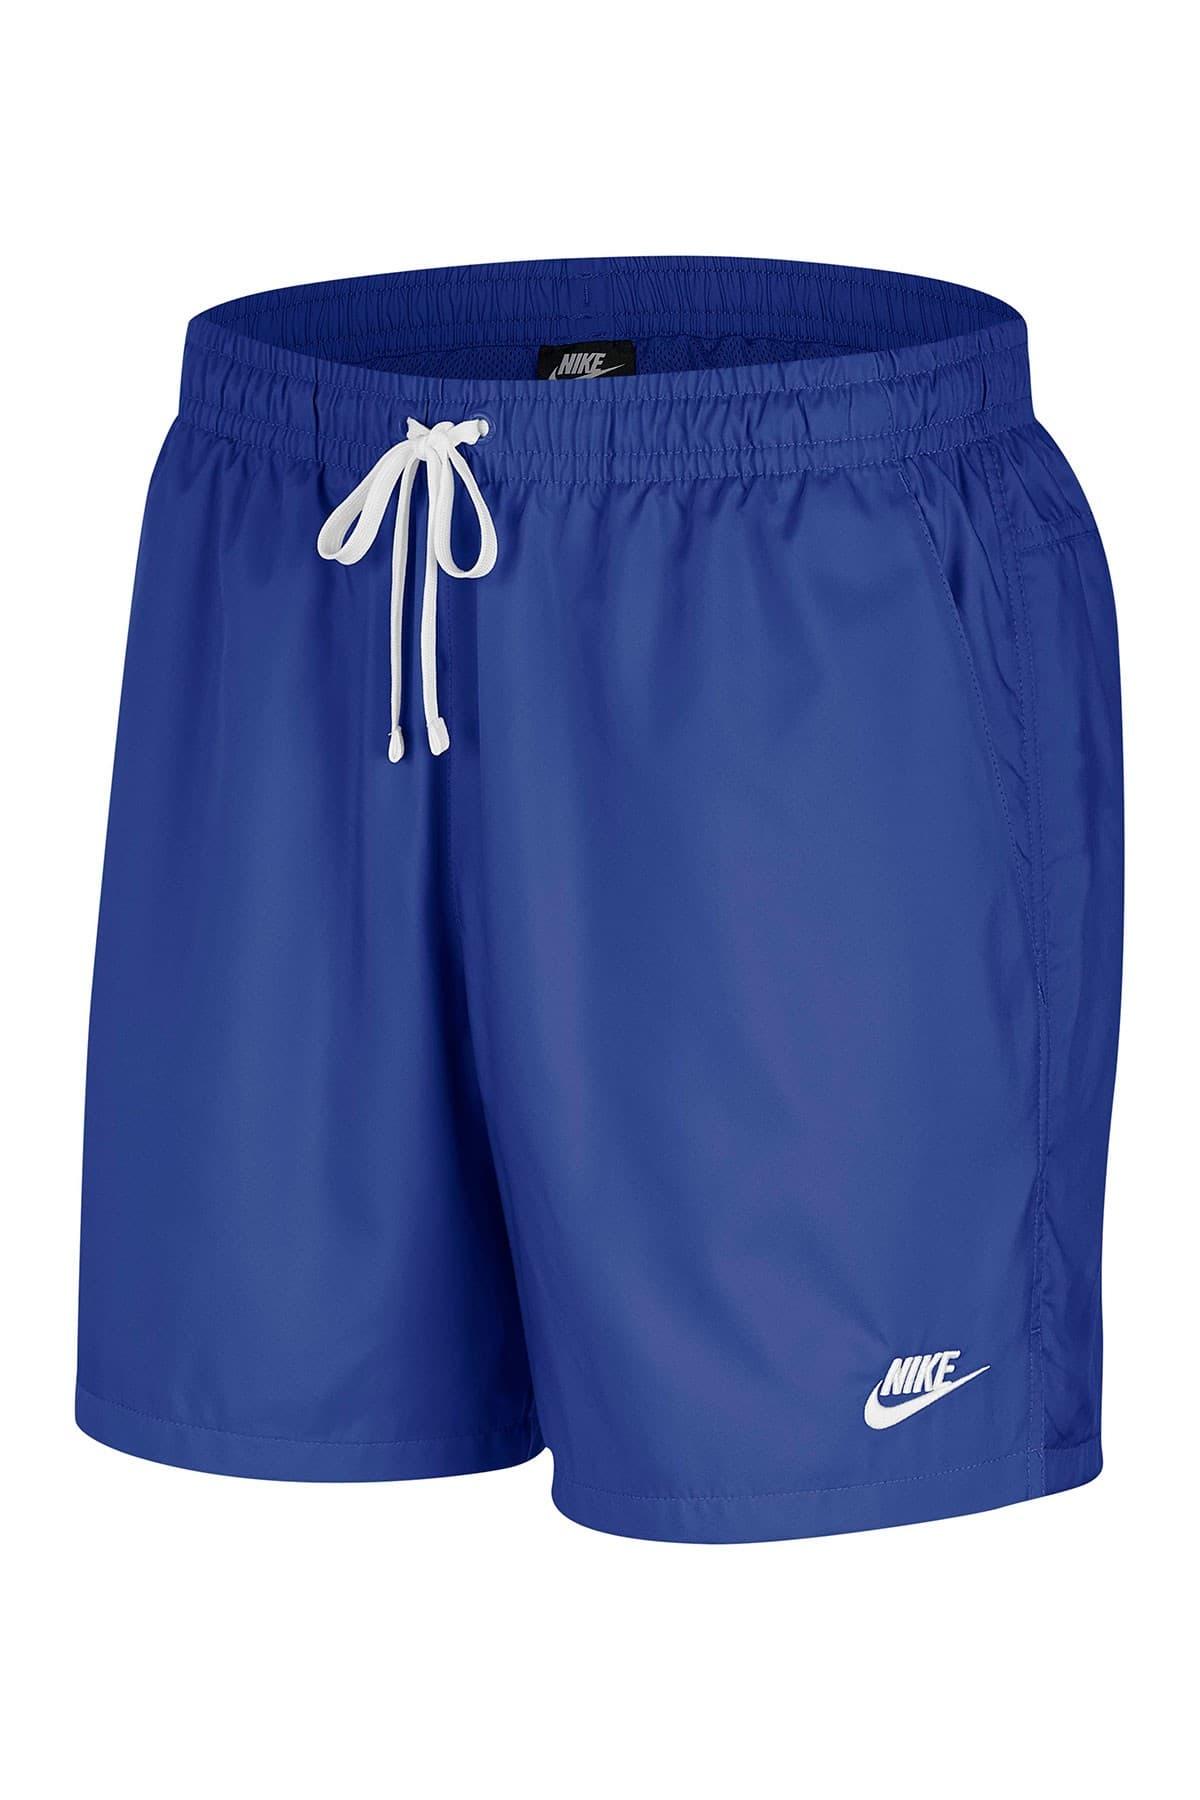 Nike Synthetic Flow Woven Shorts in Blue for Men - Lyst